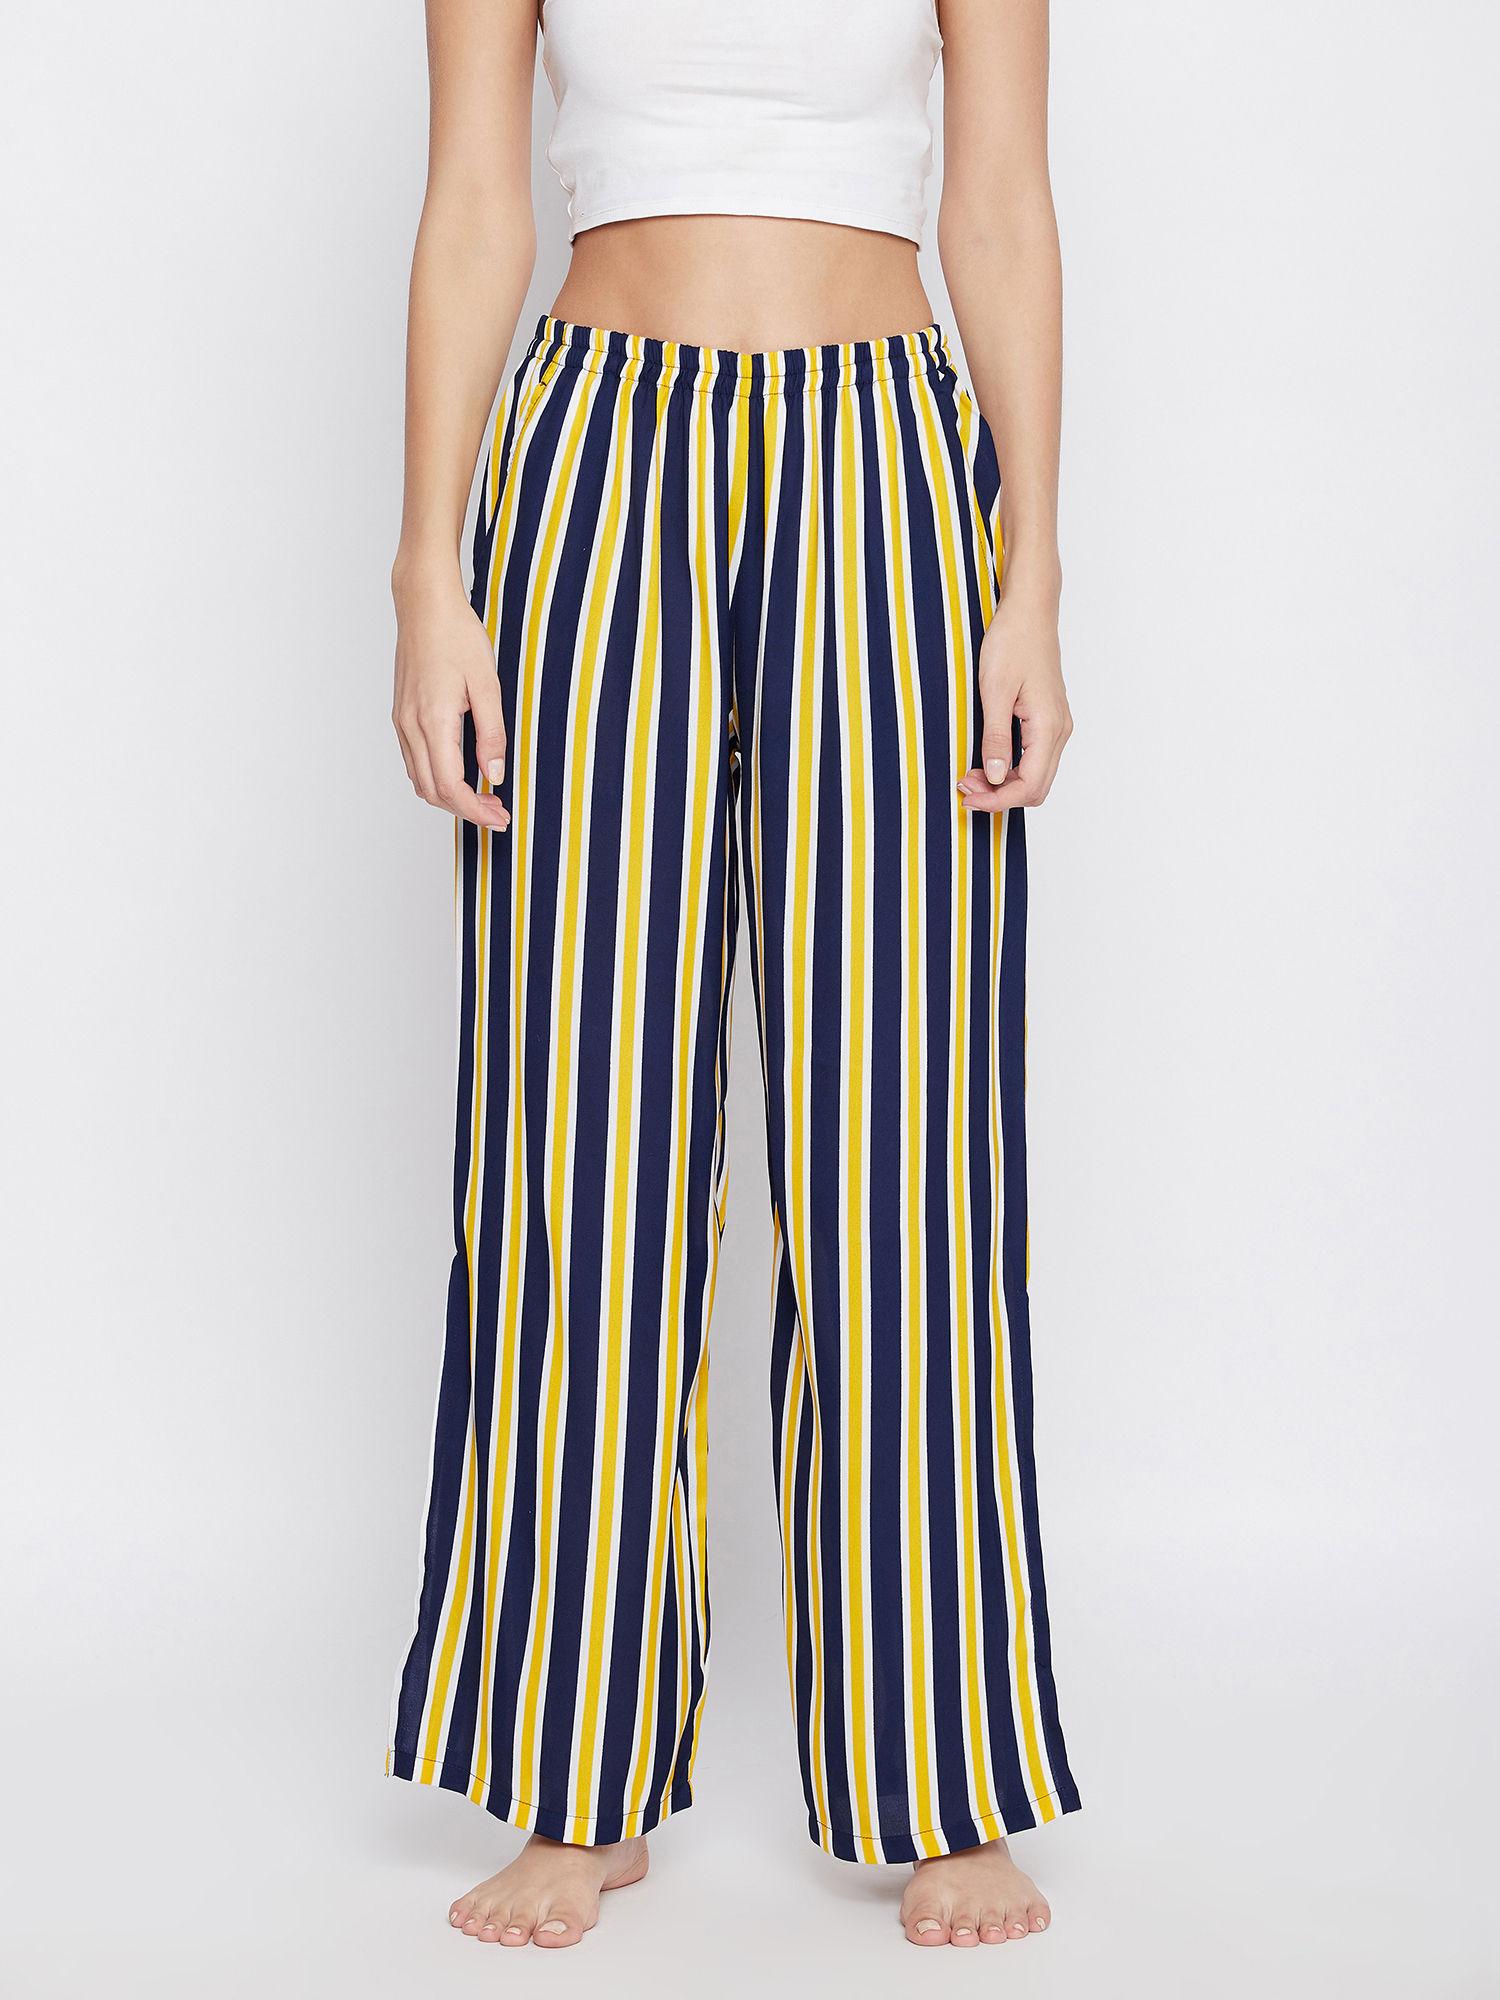 Sassy Stripes Flared Pyjama in Yellow with Side Slits - Crepe